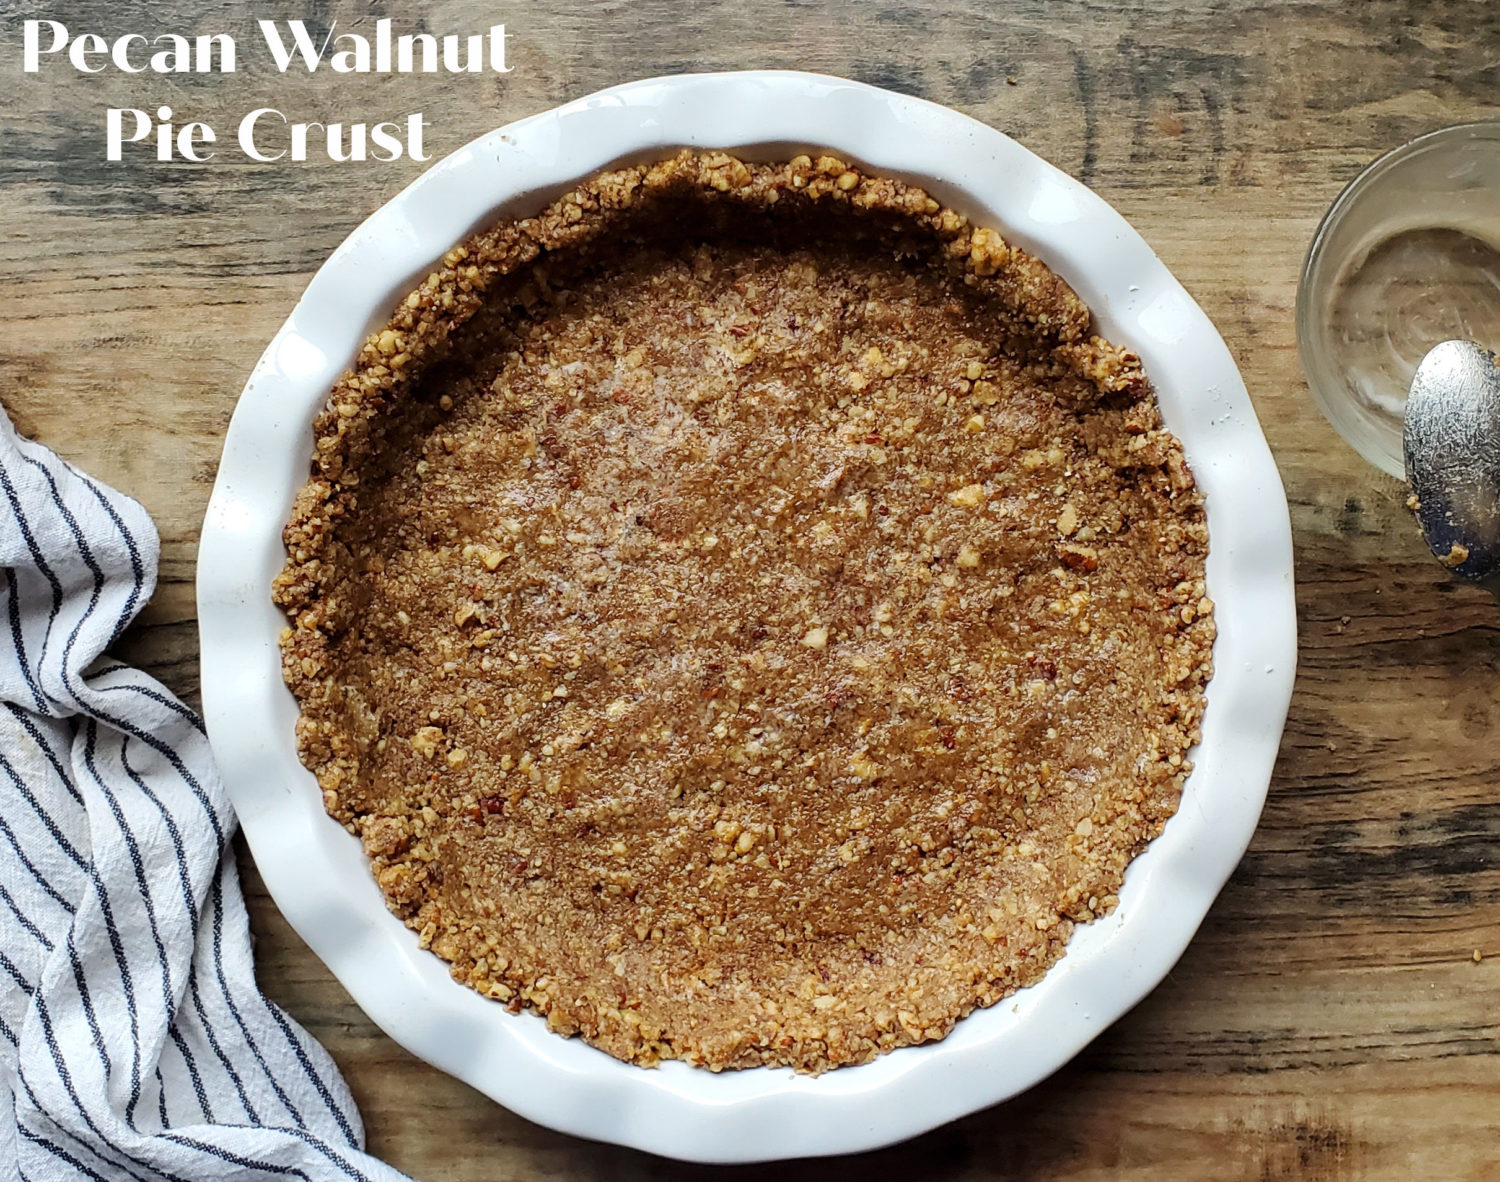 Pecan Walnut Pie Crust: Toasted nut crust with a hint of cinnamon, brown sugar, and sizzling butter; nut-a-licious! A new family favorite!